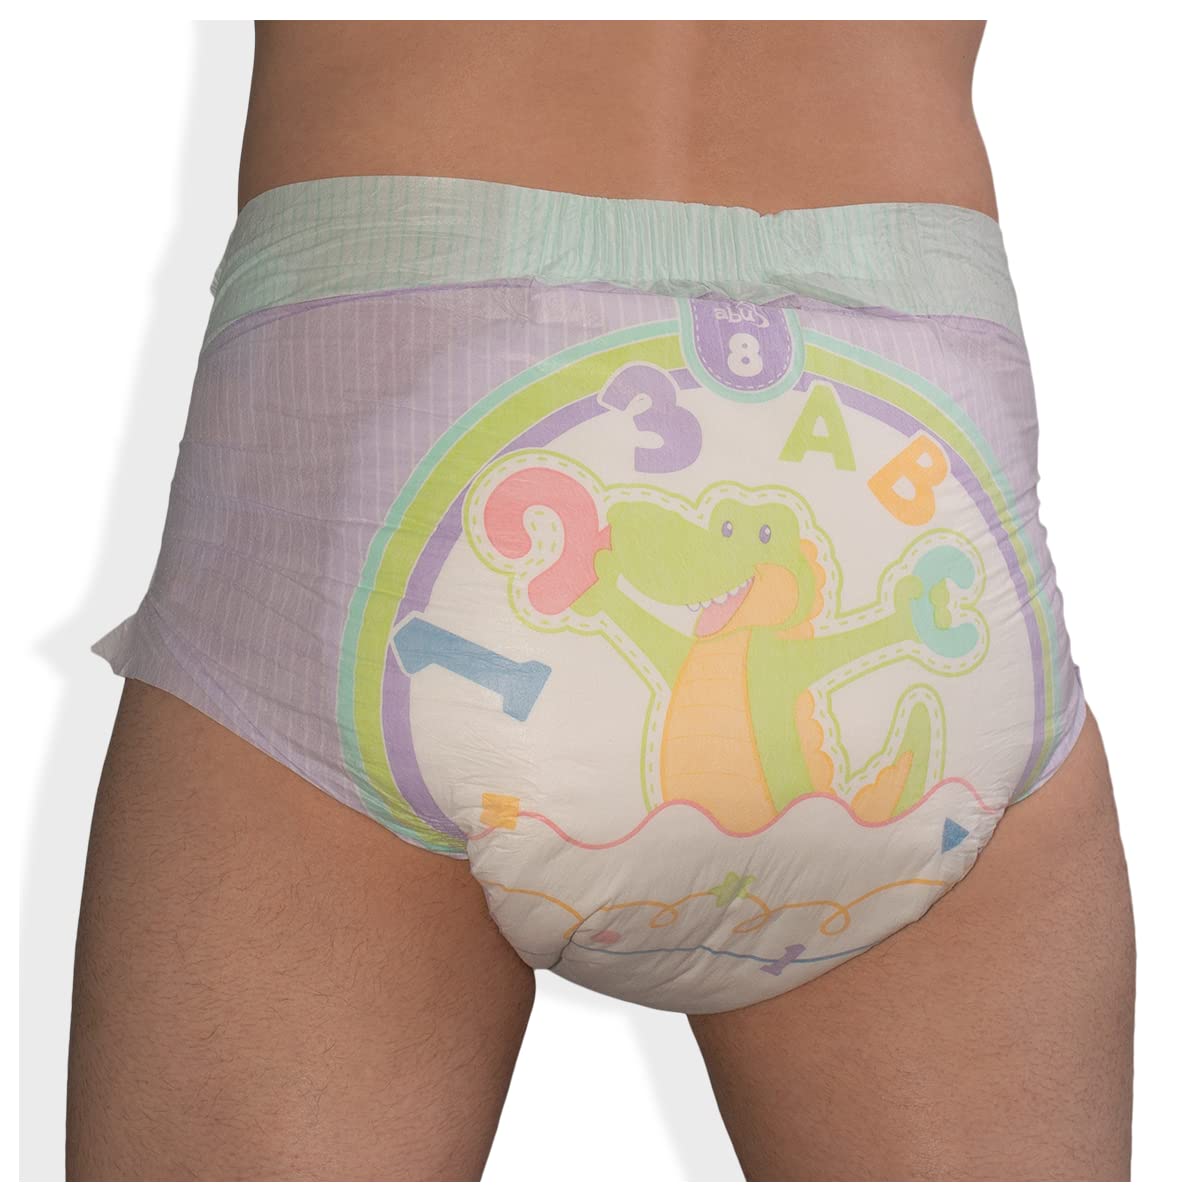 ABUniverse AlphaGatorz Diapers (Pack of 10) (Extra Large)